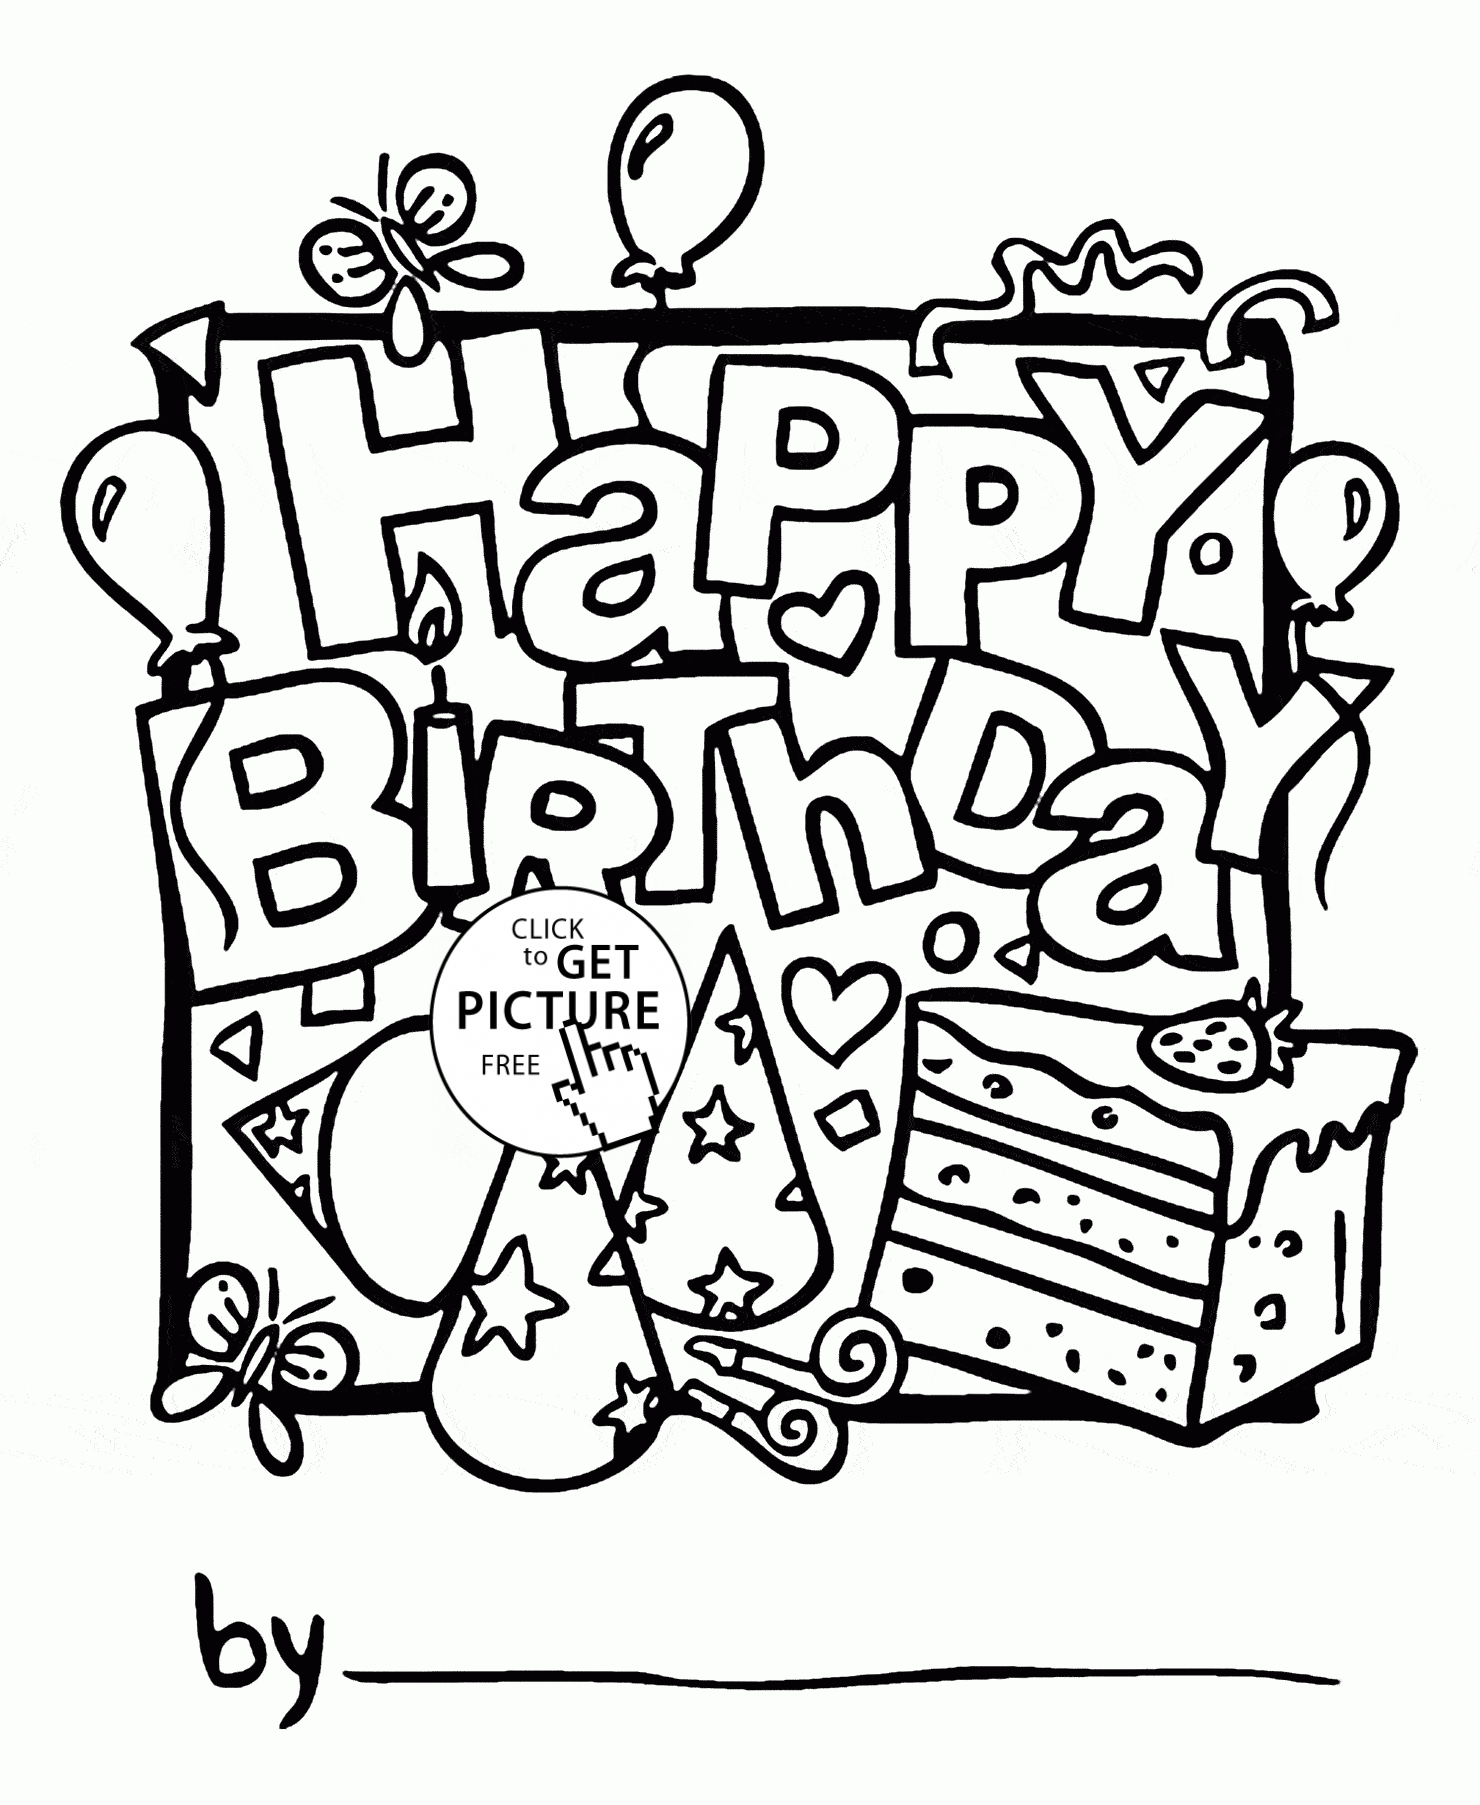 free-coloring-pages-birthday-card-for-boy-download-free-coloring-pages-birthday-card-for-boy